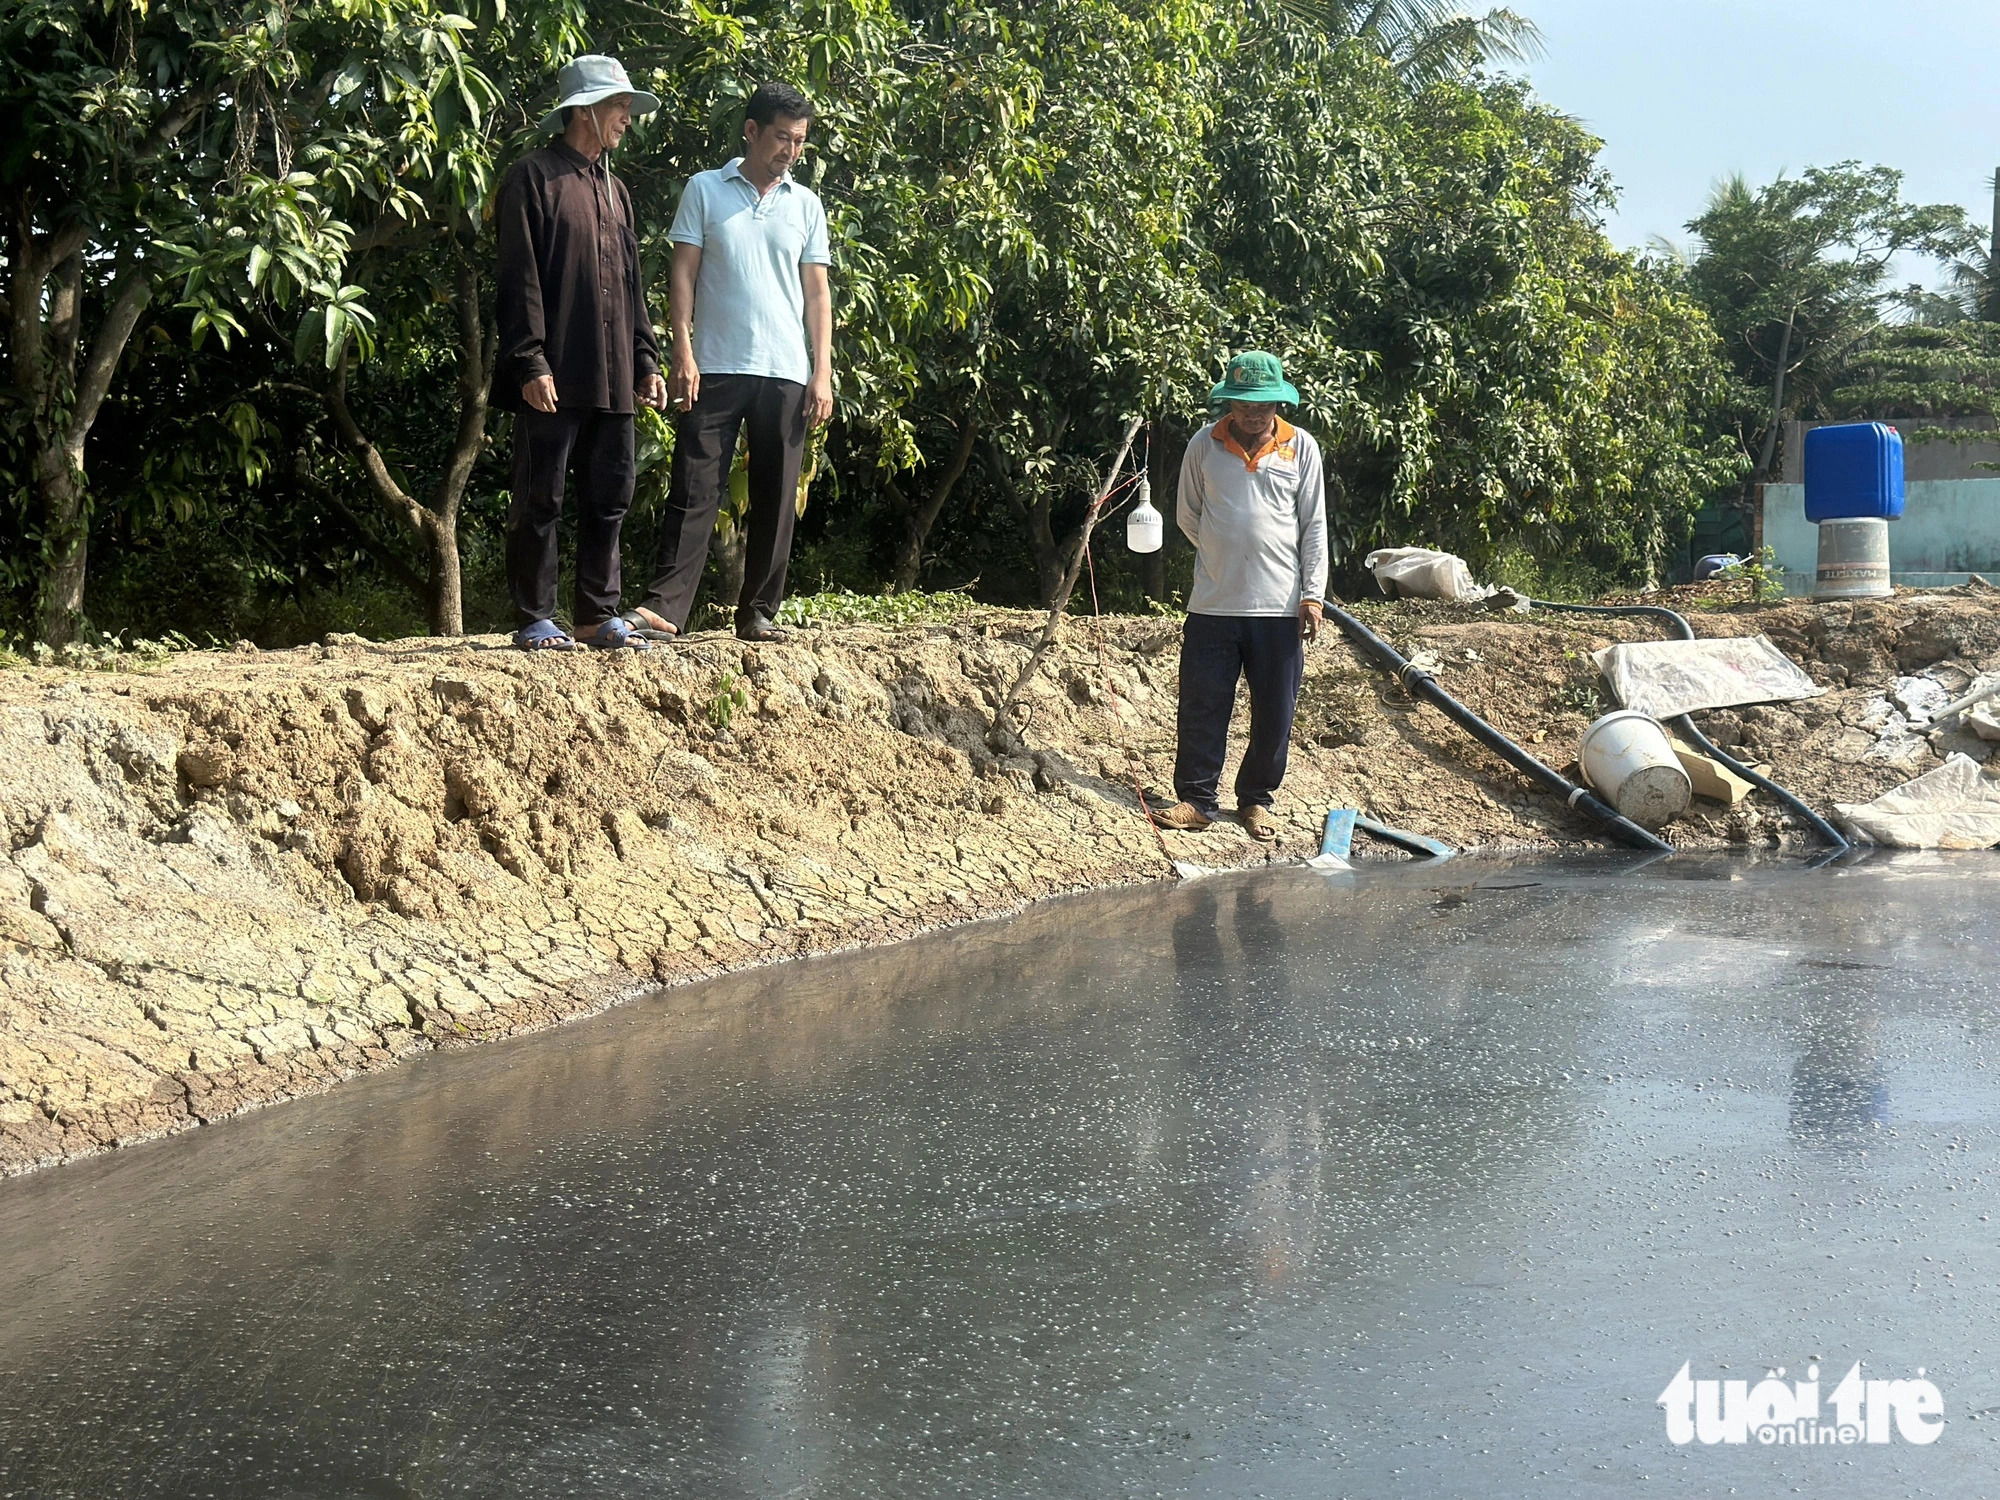 Locals irked by pollution from fruit processing facility in Vietnam’s Dong Thap